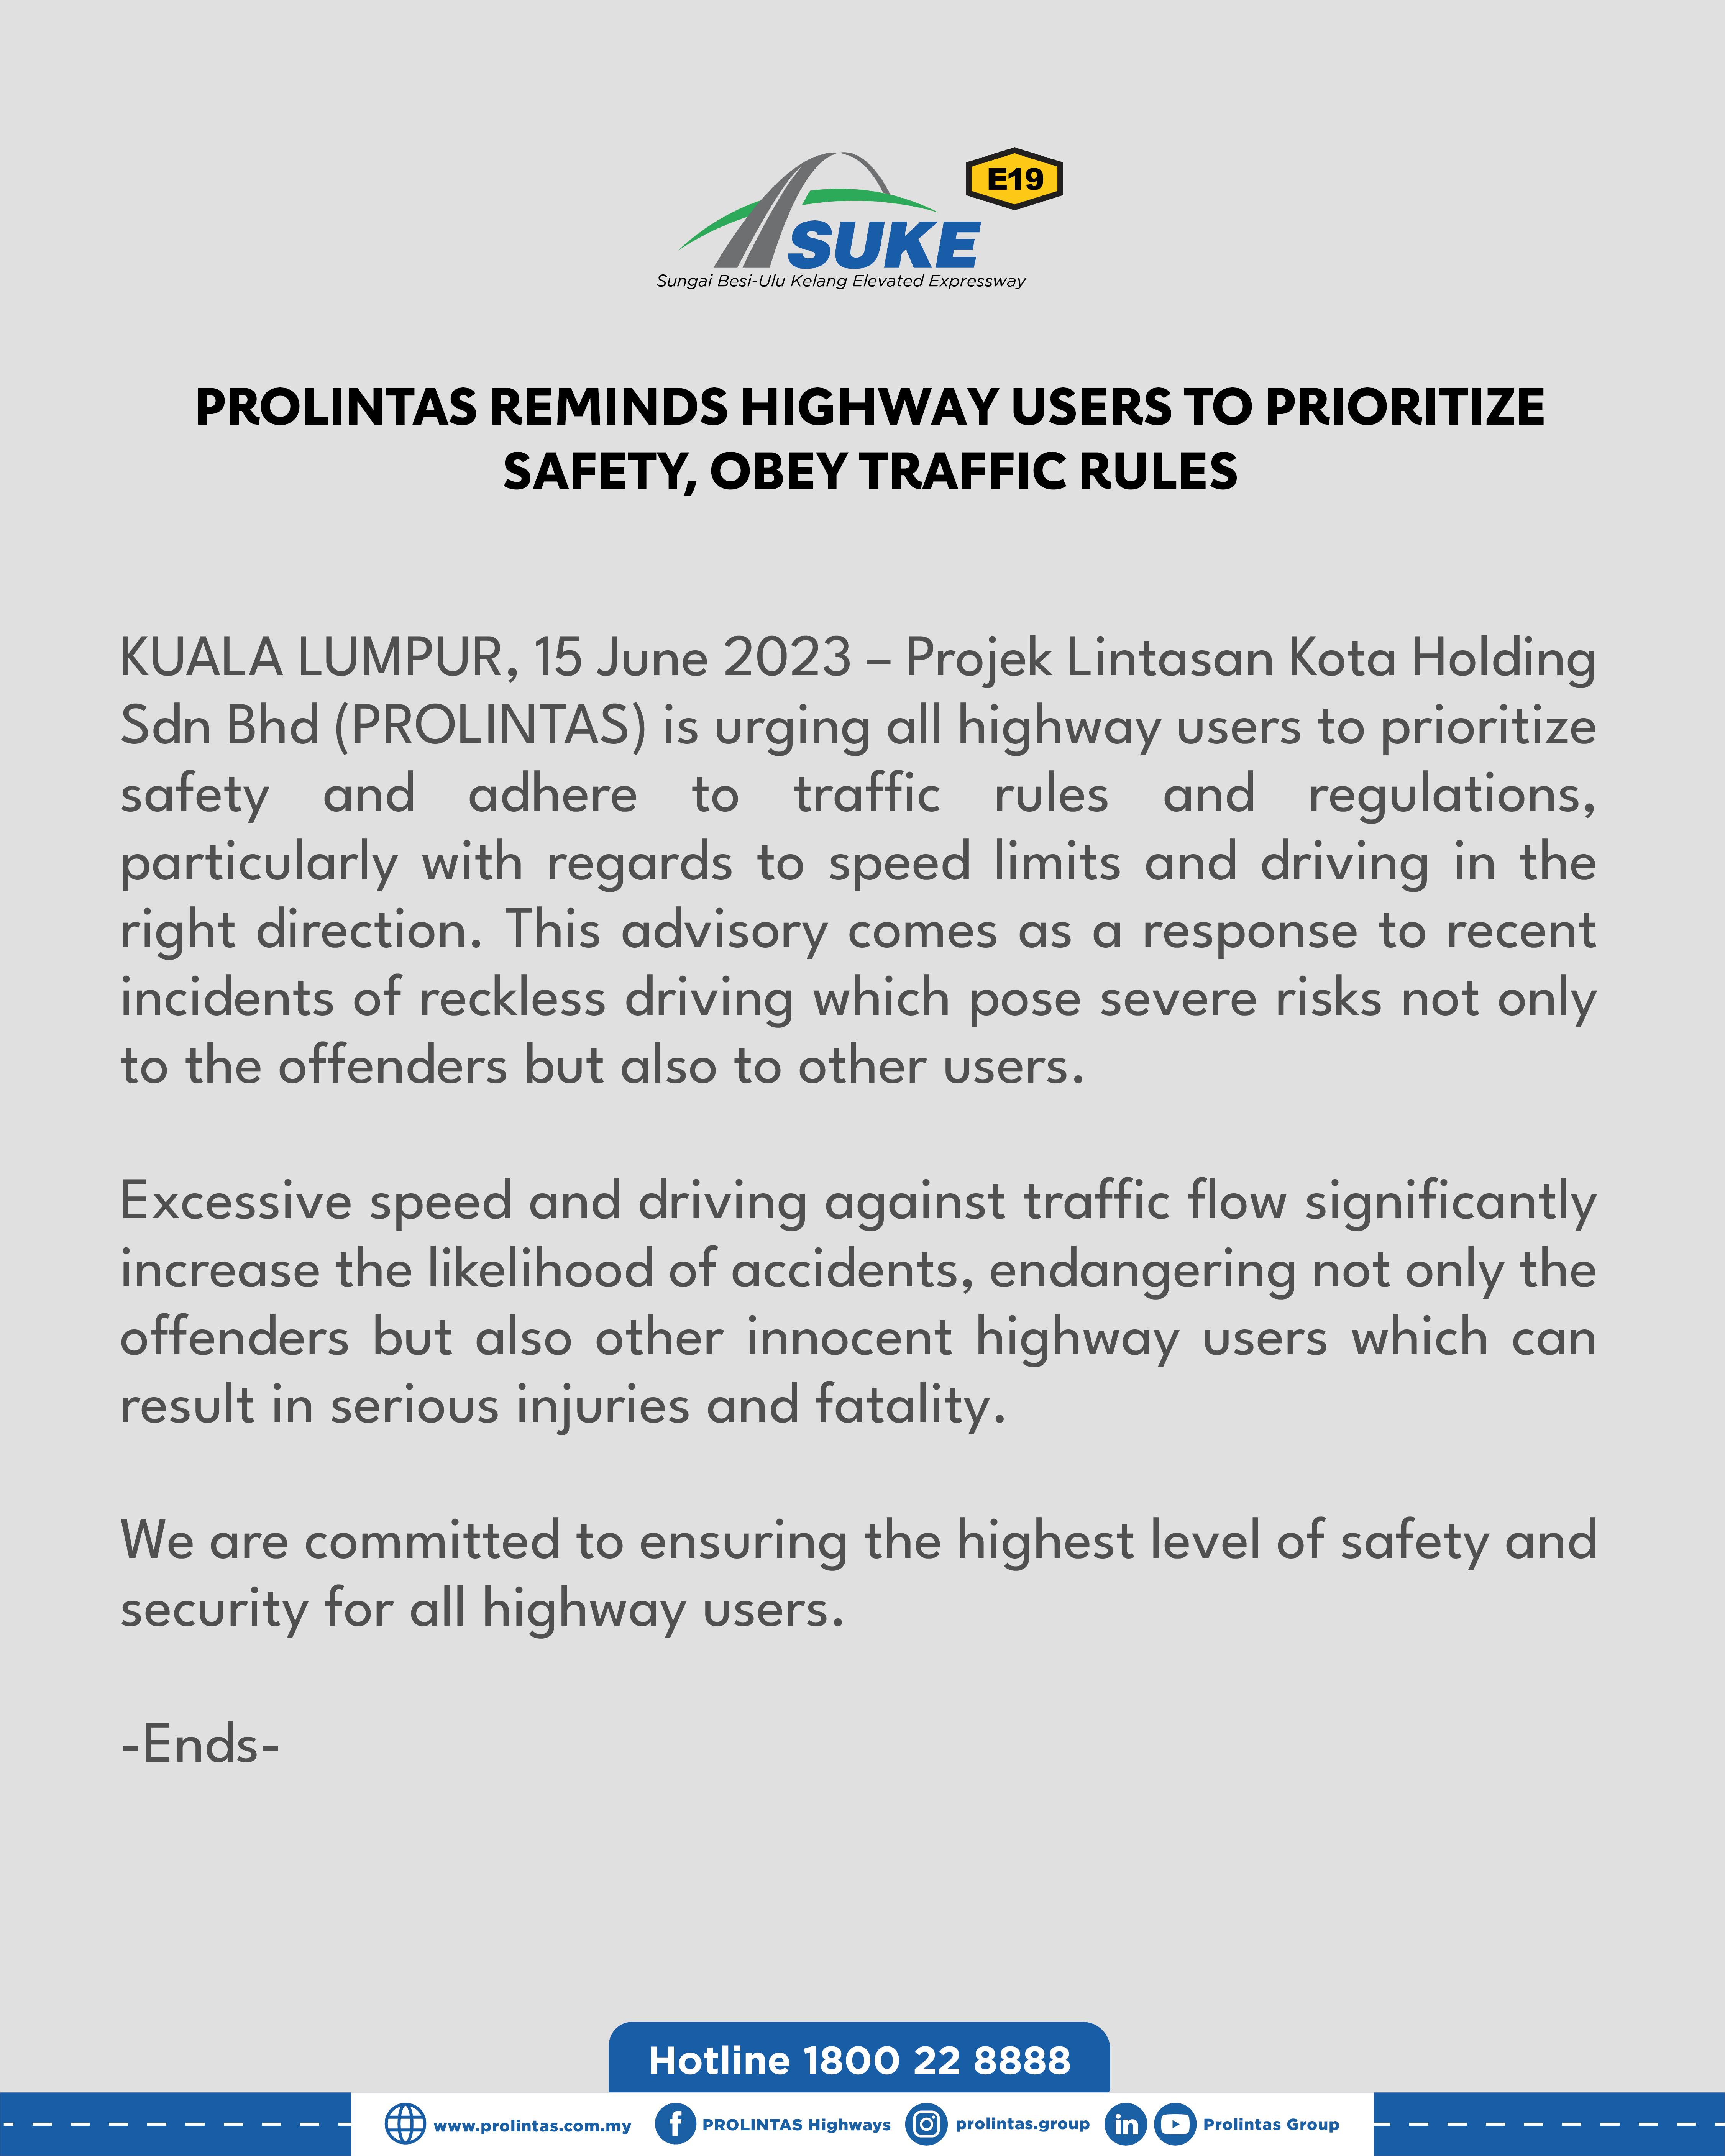 PROLINTAS REMINDS HIGHWAY USERS TO PRIORITIZE SAFETY, OBEY TRAFFIC RULES